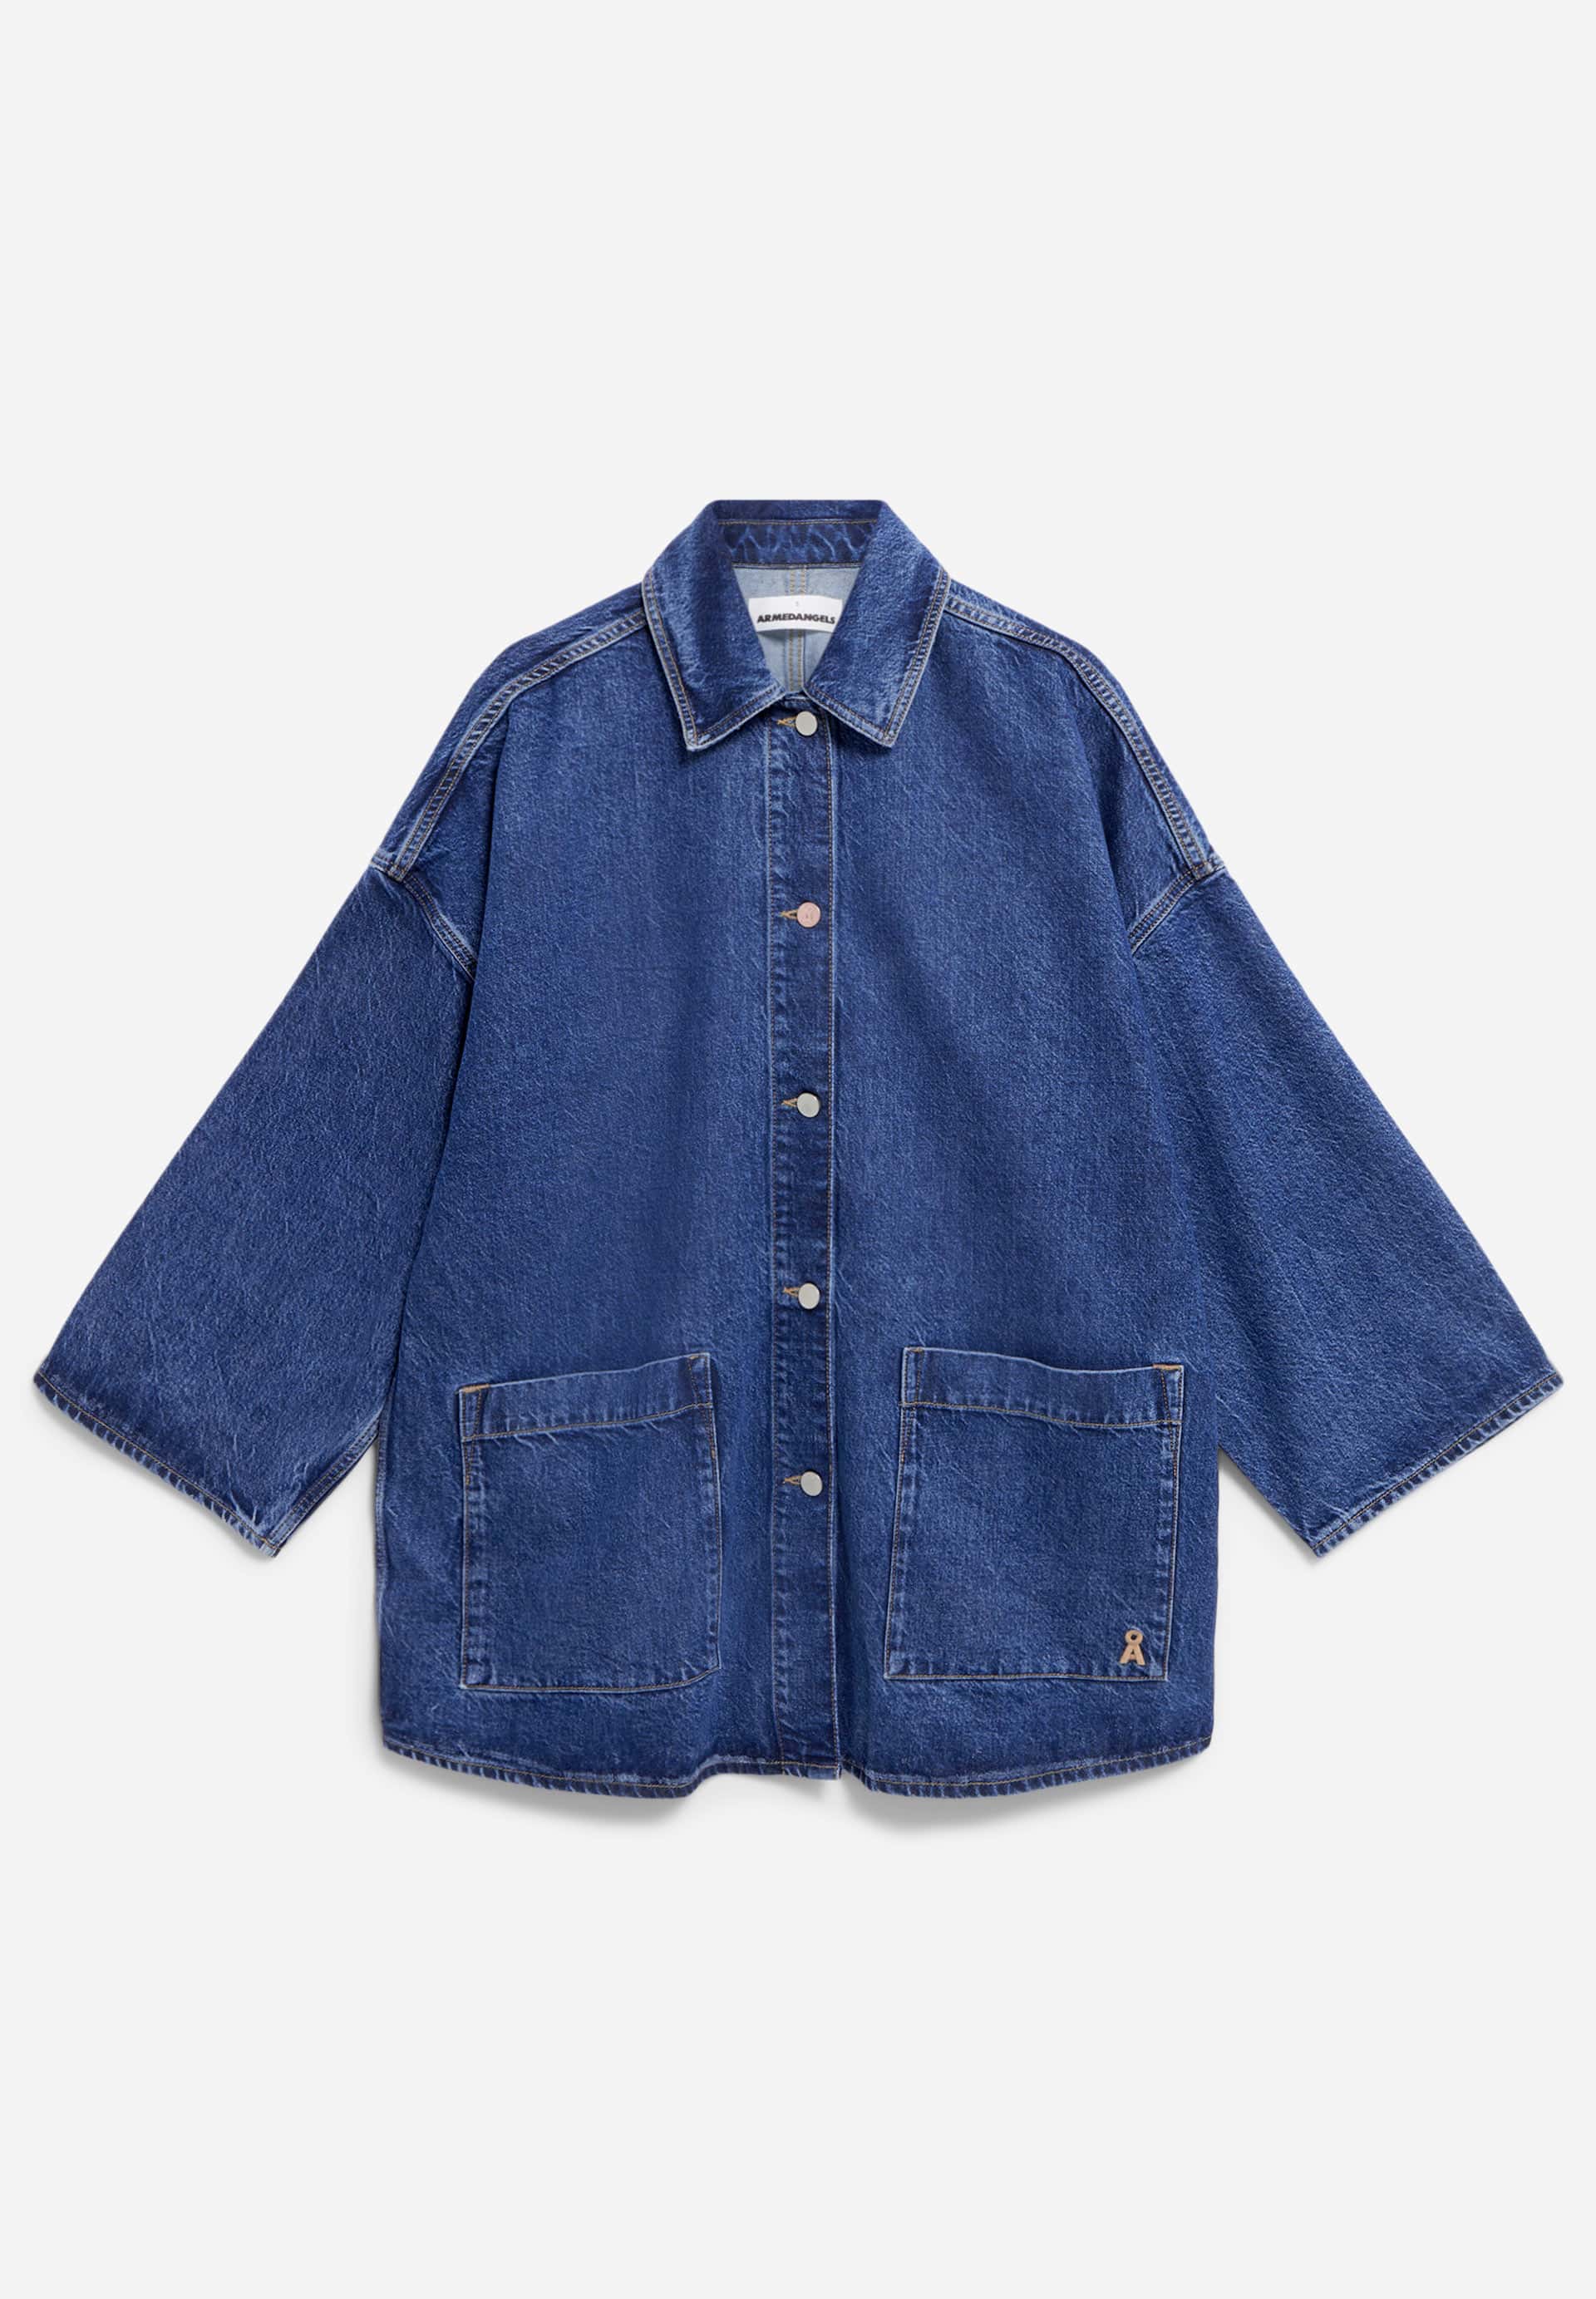 DRAAPY Denim Jacket Oversized Fit made of TENCEL™ Lyocell Mix